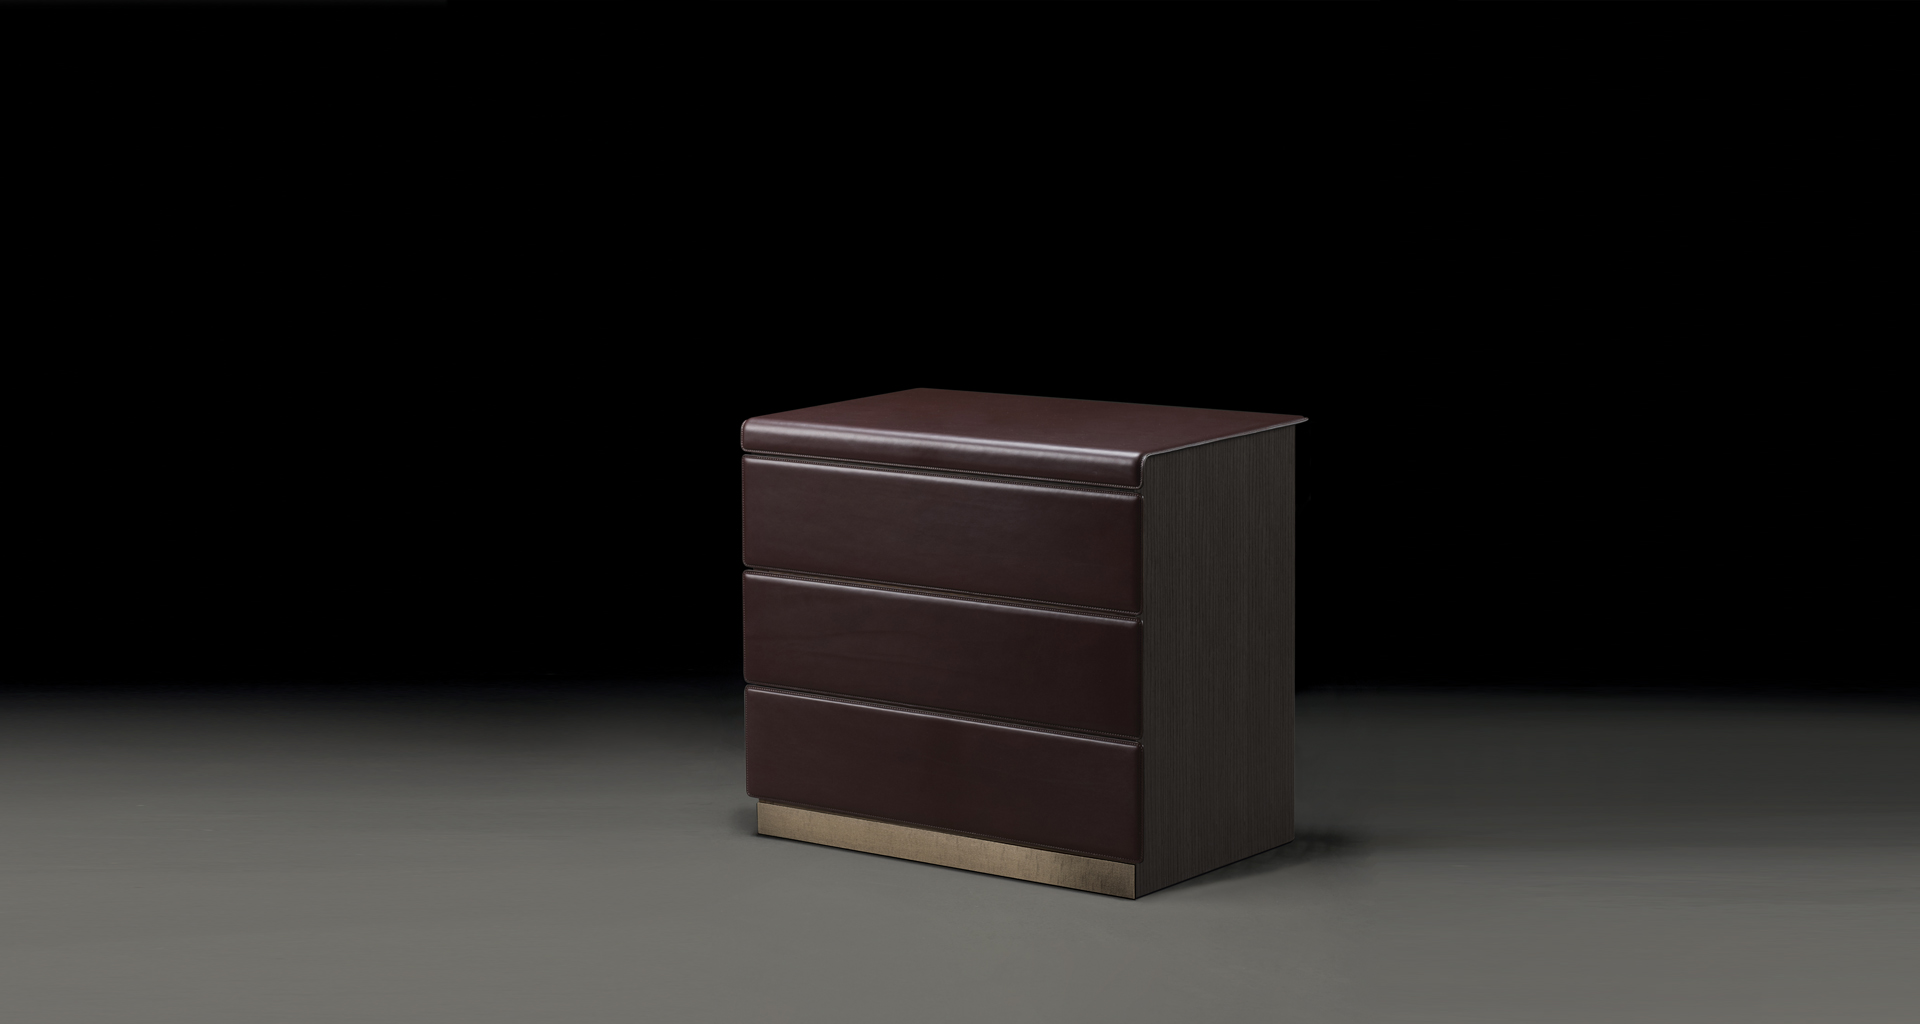 Orione is a wooden bedside table with drawers from the Promemoria's catalogue | Promemoria